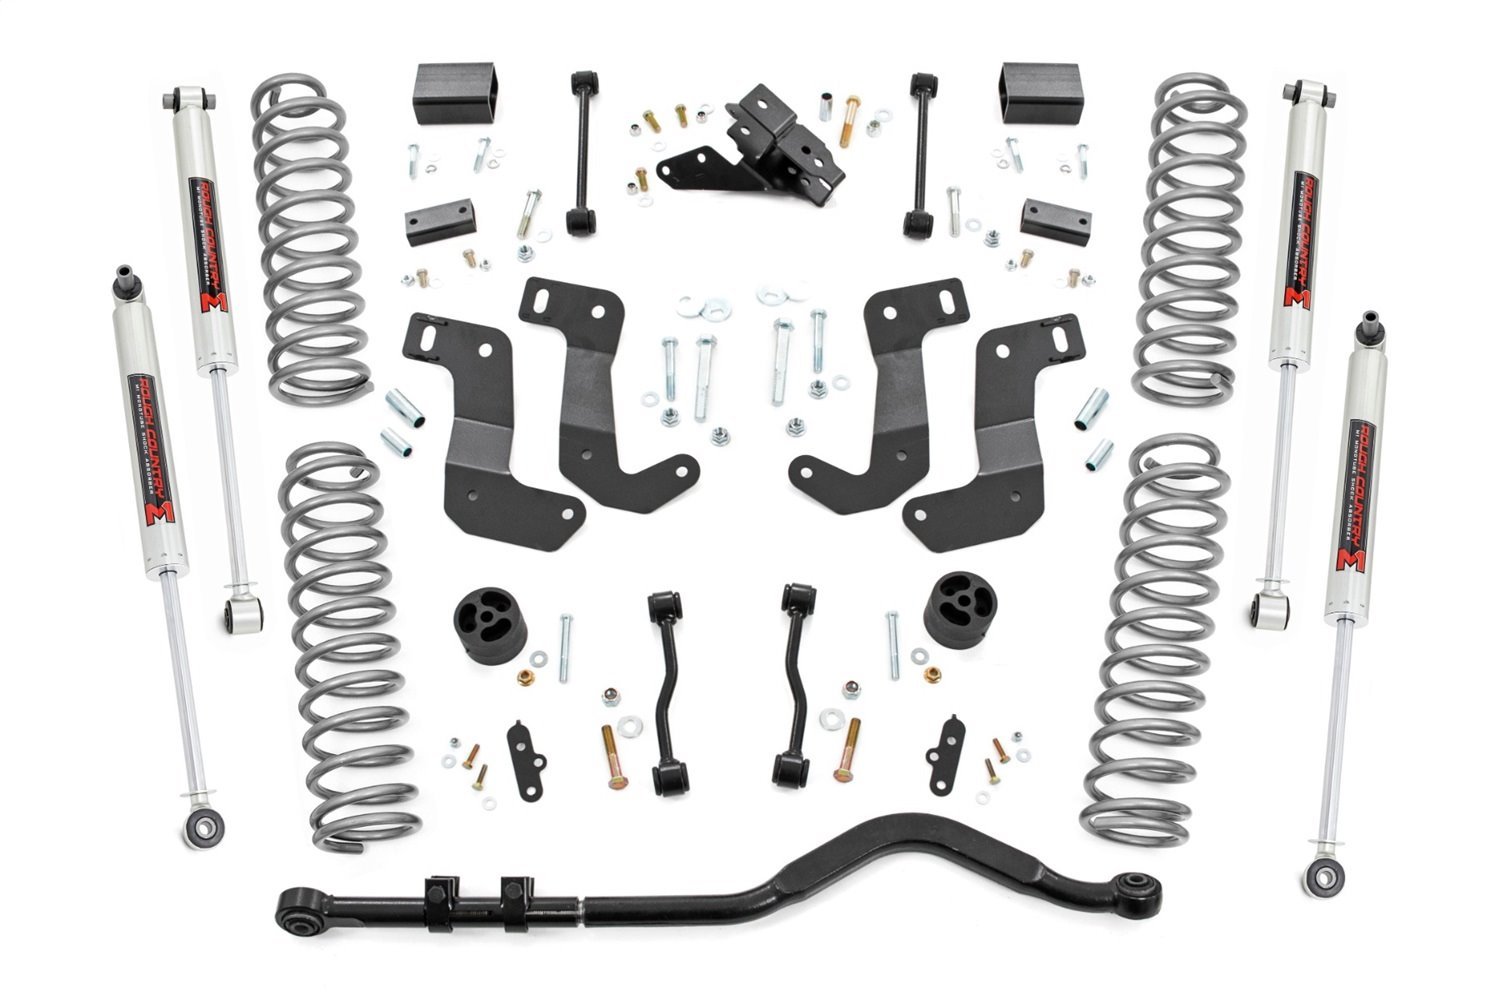 66840 3.5 in. Lift Kit, C/A Drop, Stage 1, M1, Fits Select Jeep Wrangler JL